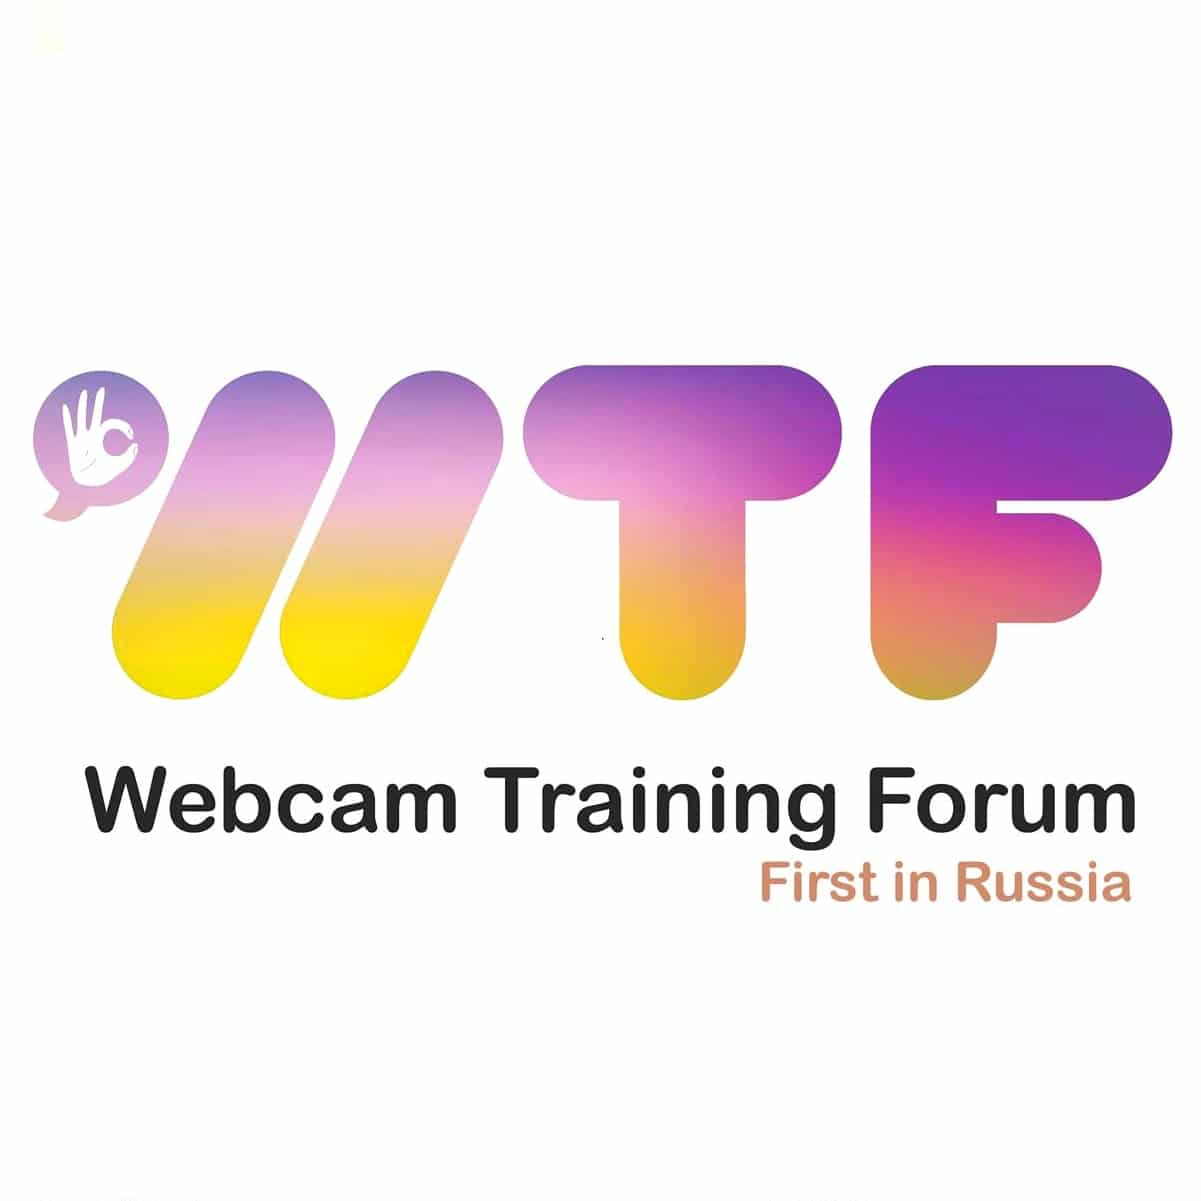 Webcam Forum WTF 2019 Webvideo Live video chat software